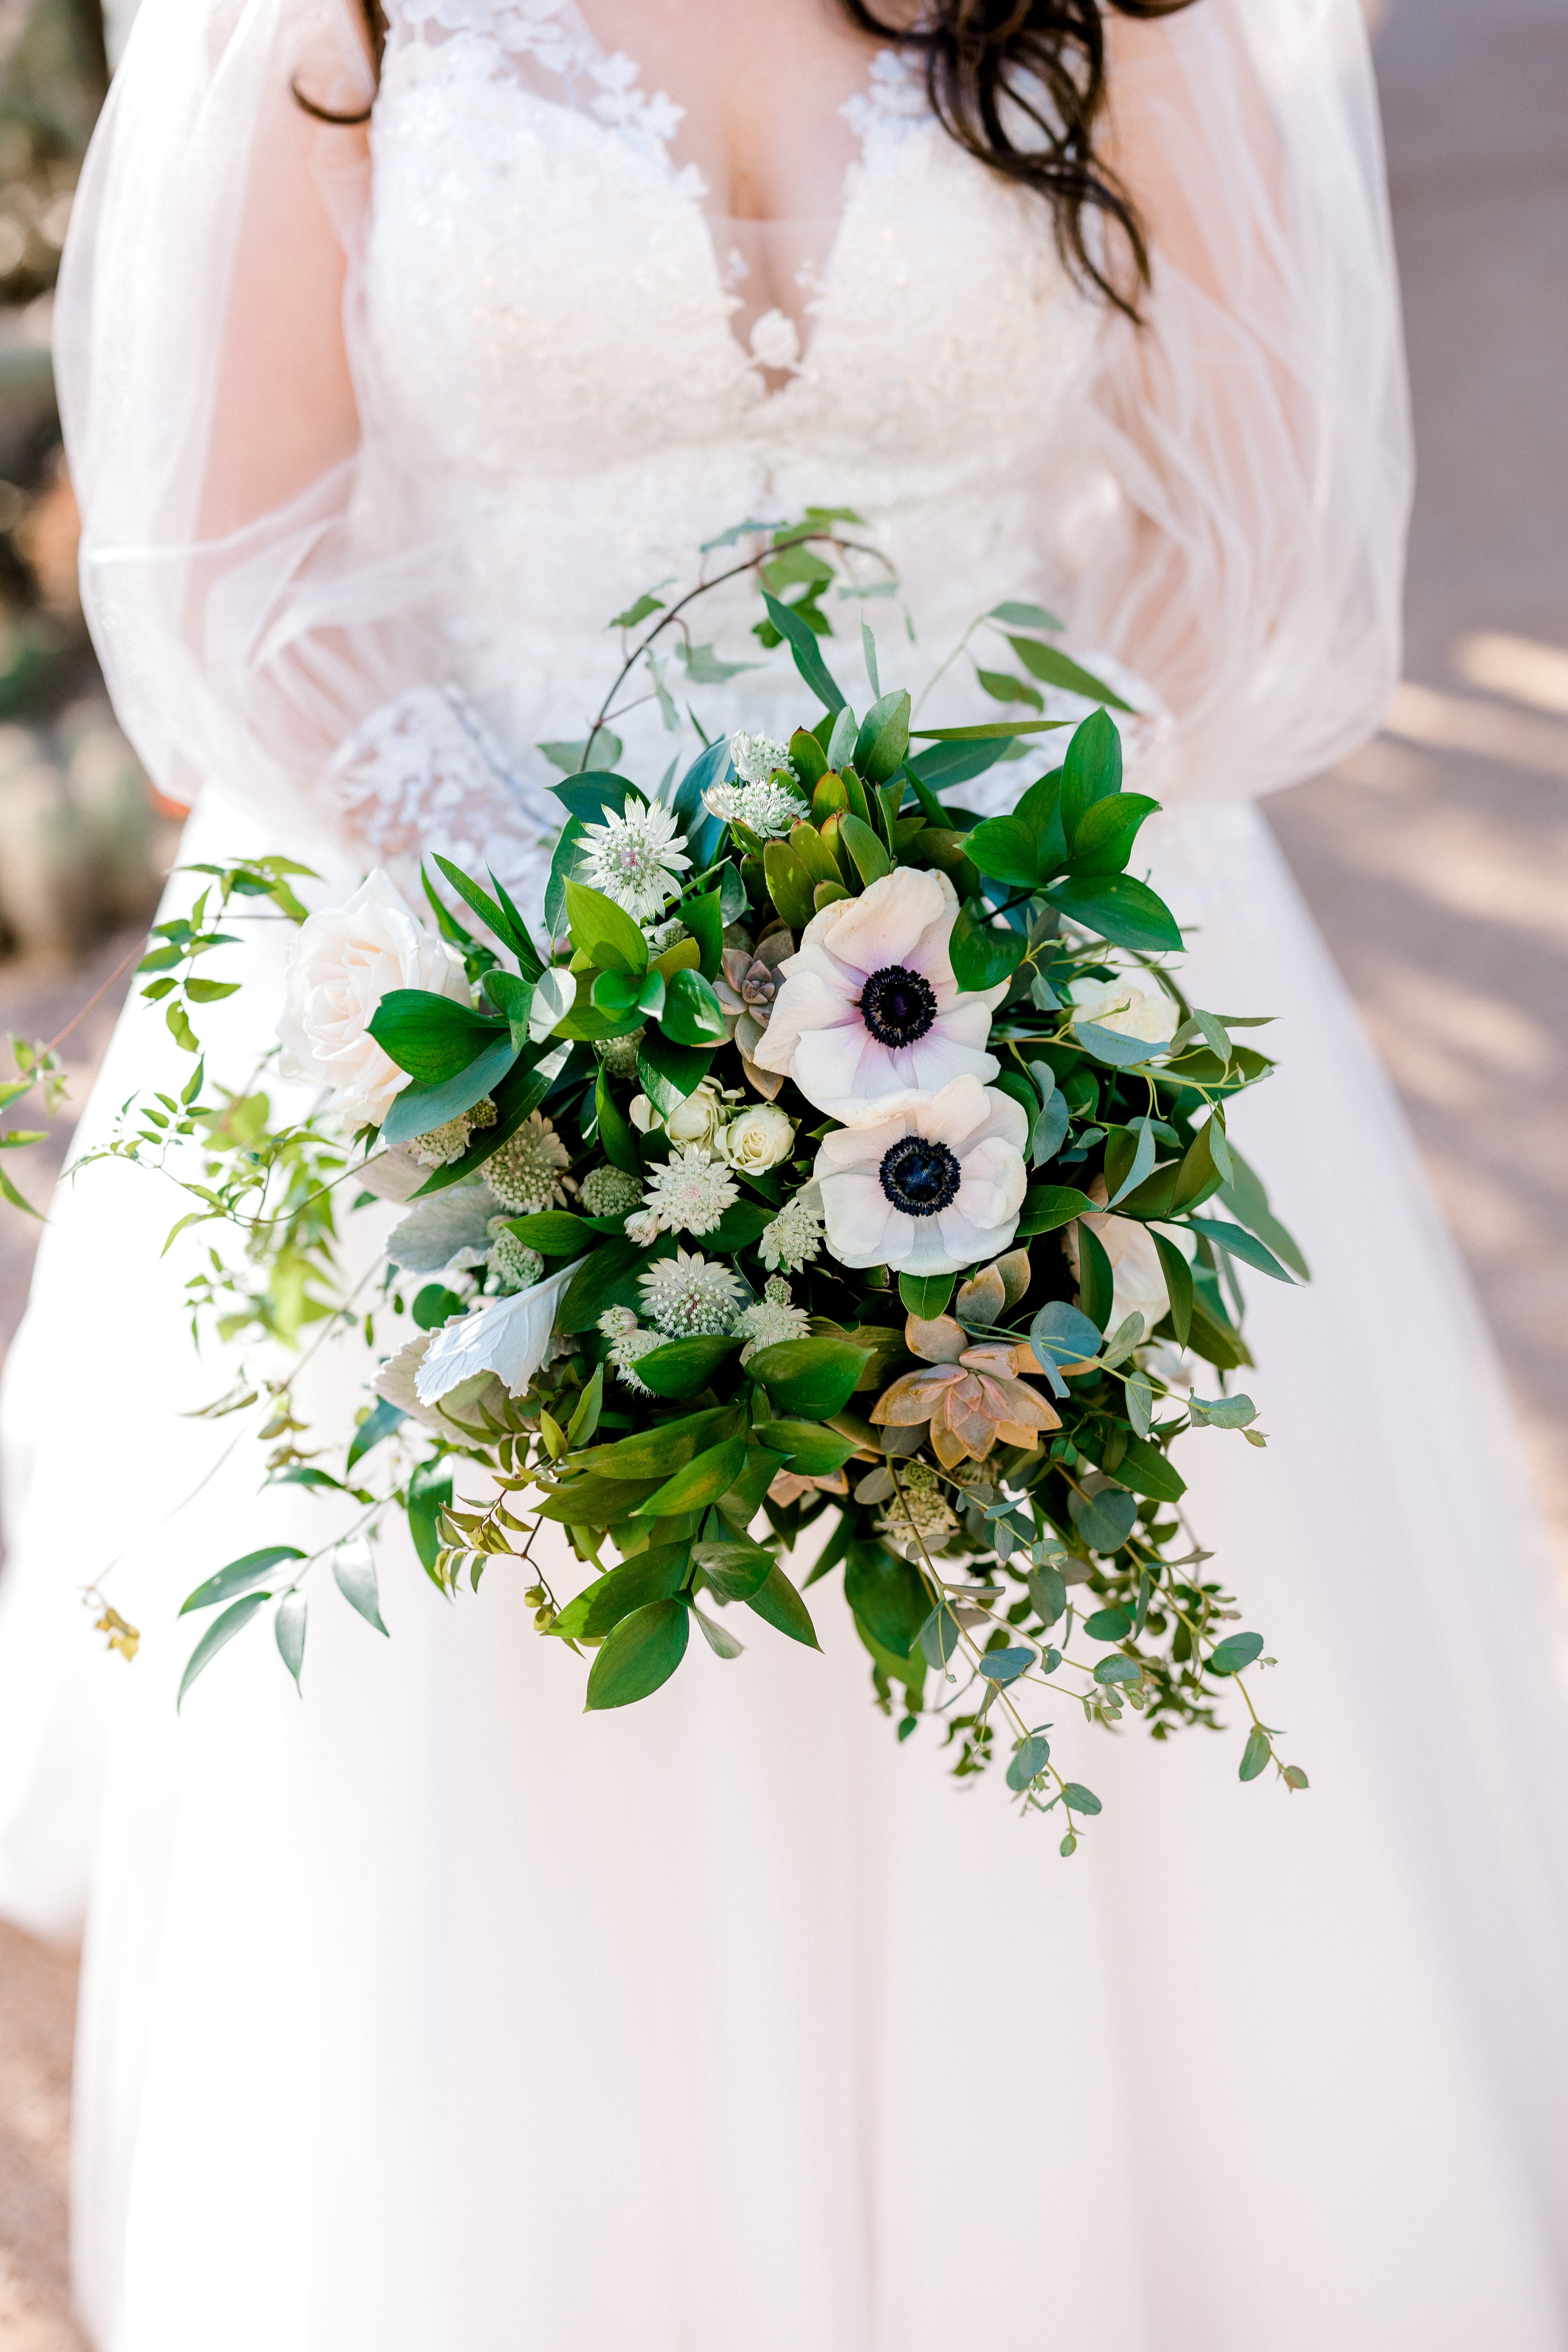 Bride holding bouquet of greenery and white flowers at a desert wedding